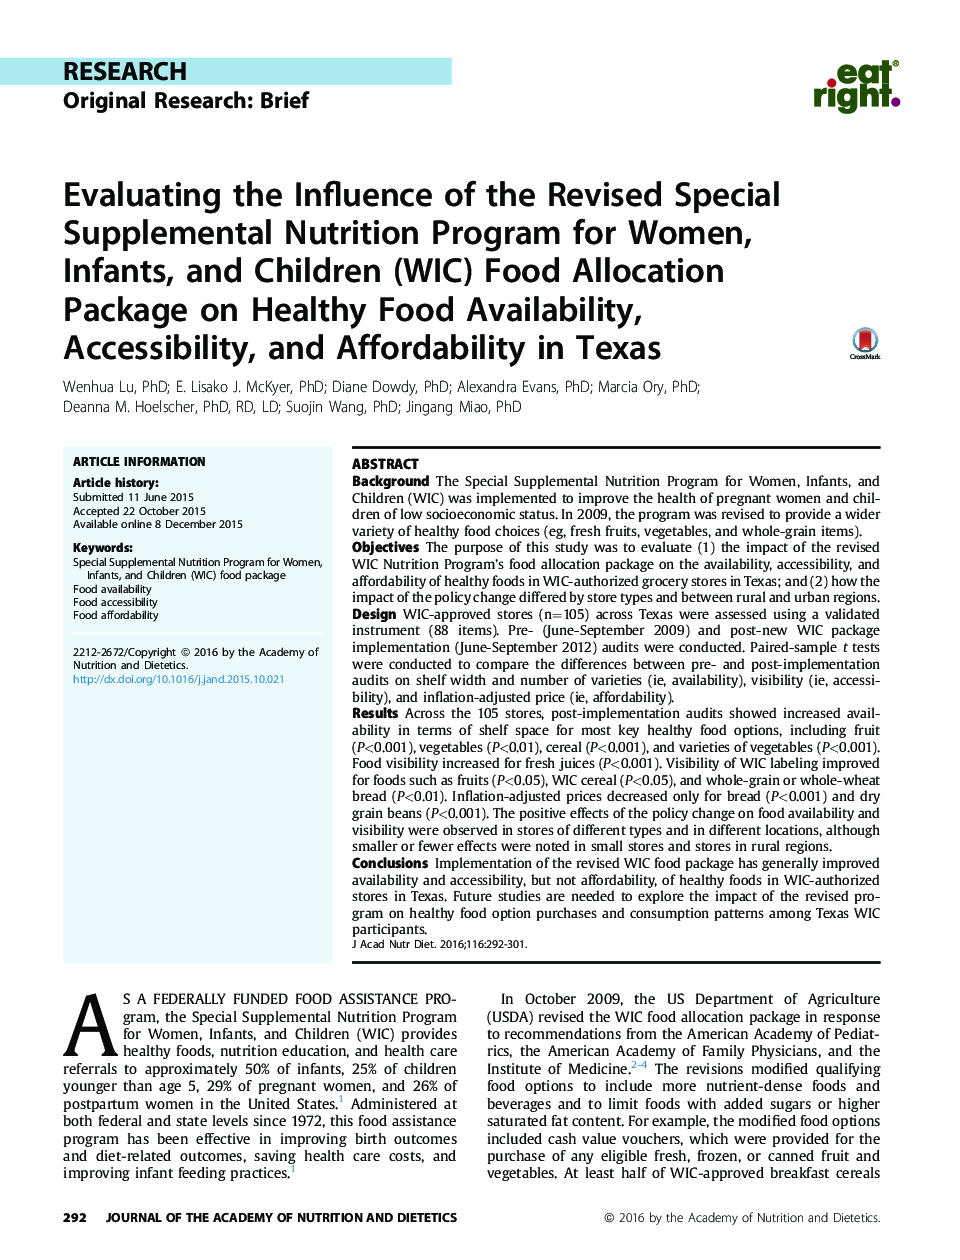 Evaluating the Influence of the Revised Special Supplemental Nutrition Program for Women, Infants, and Children (WIC) Food Allocation Package on Healthy Food Availability, Accessibility, and Affordability in Texas